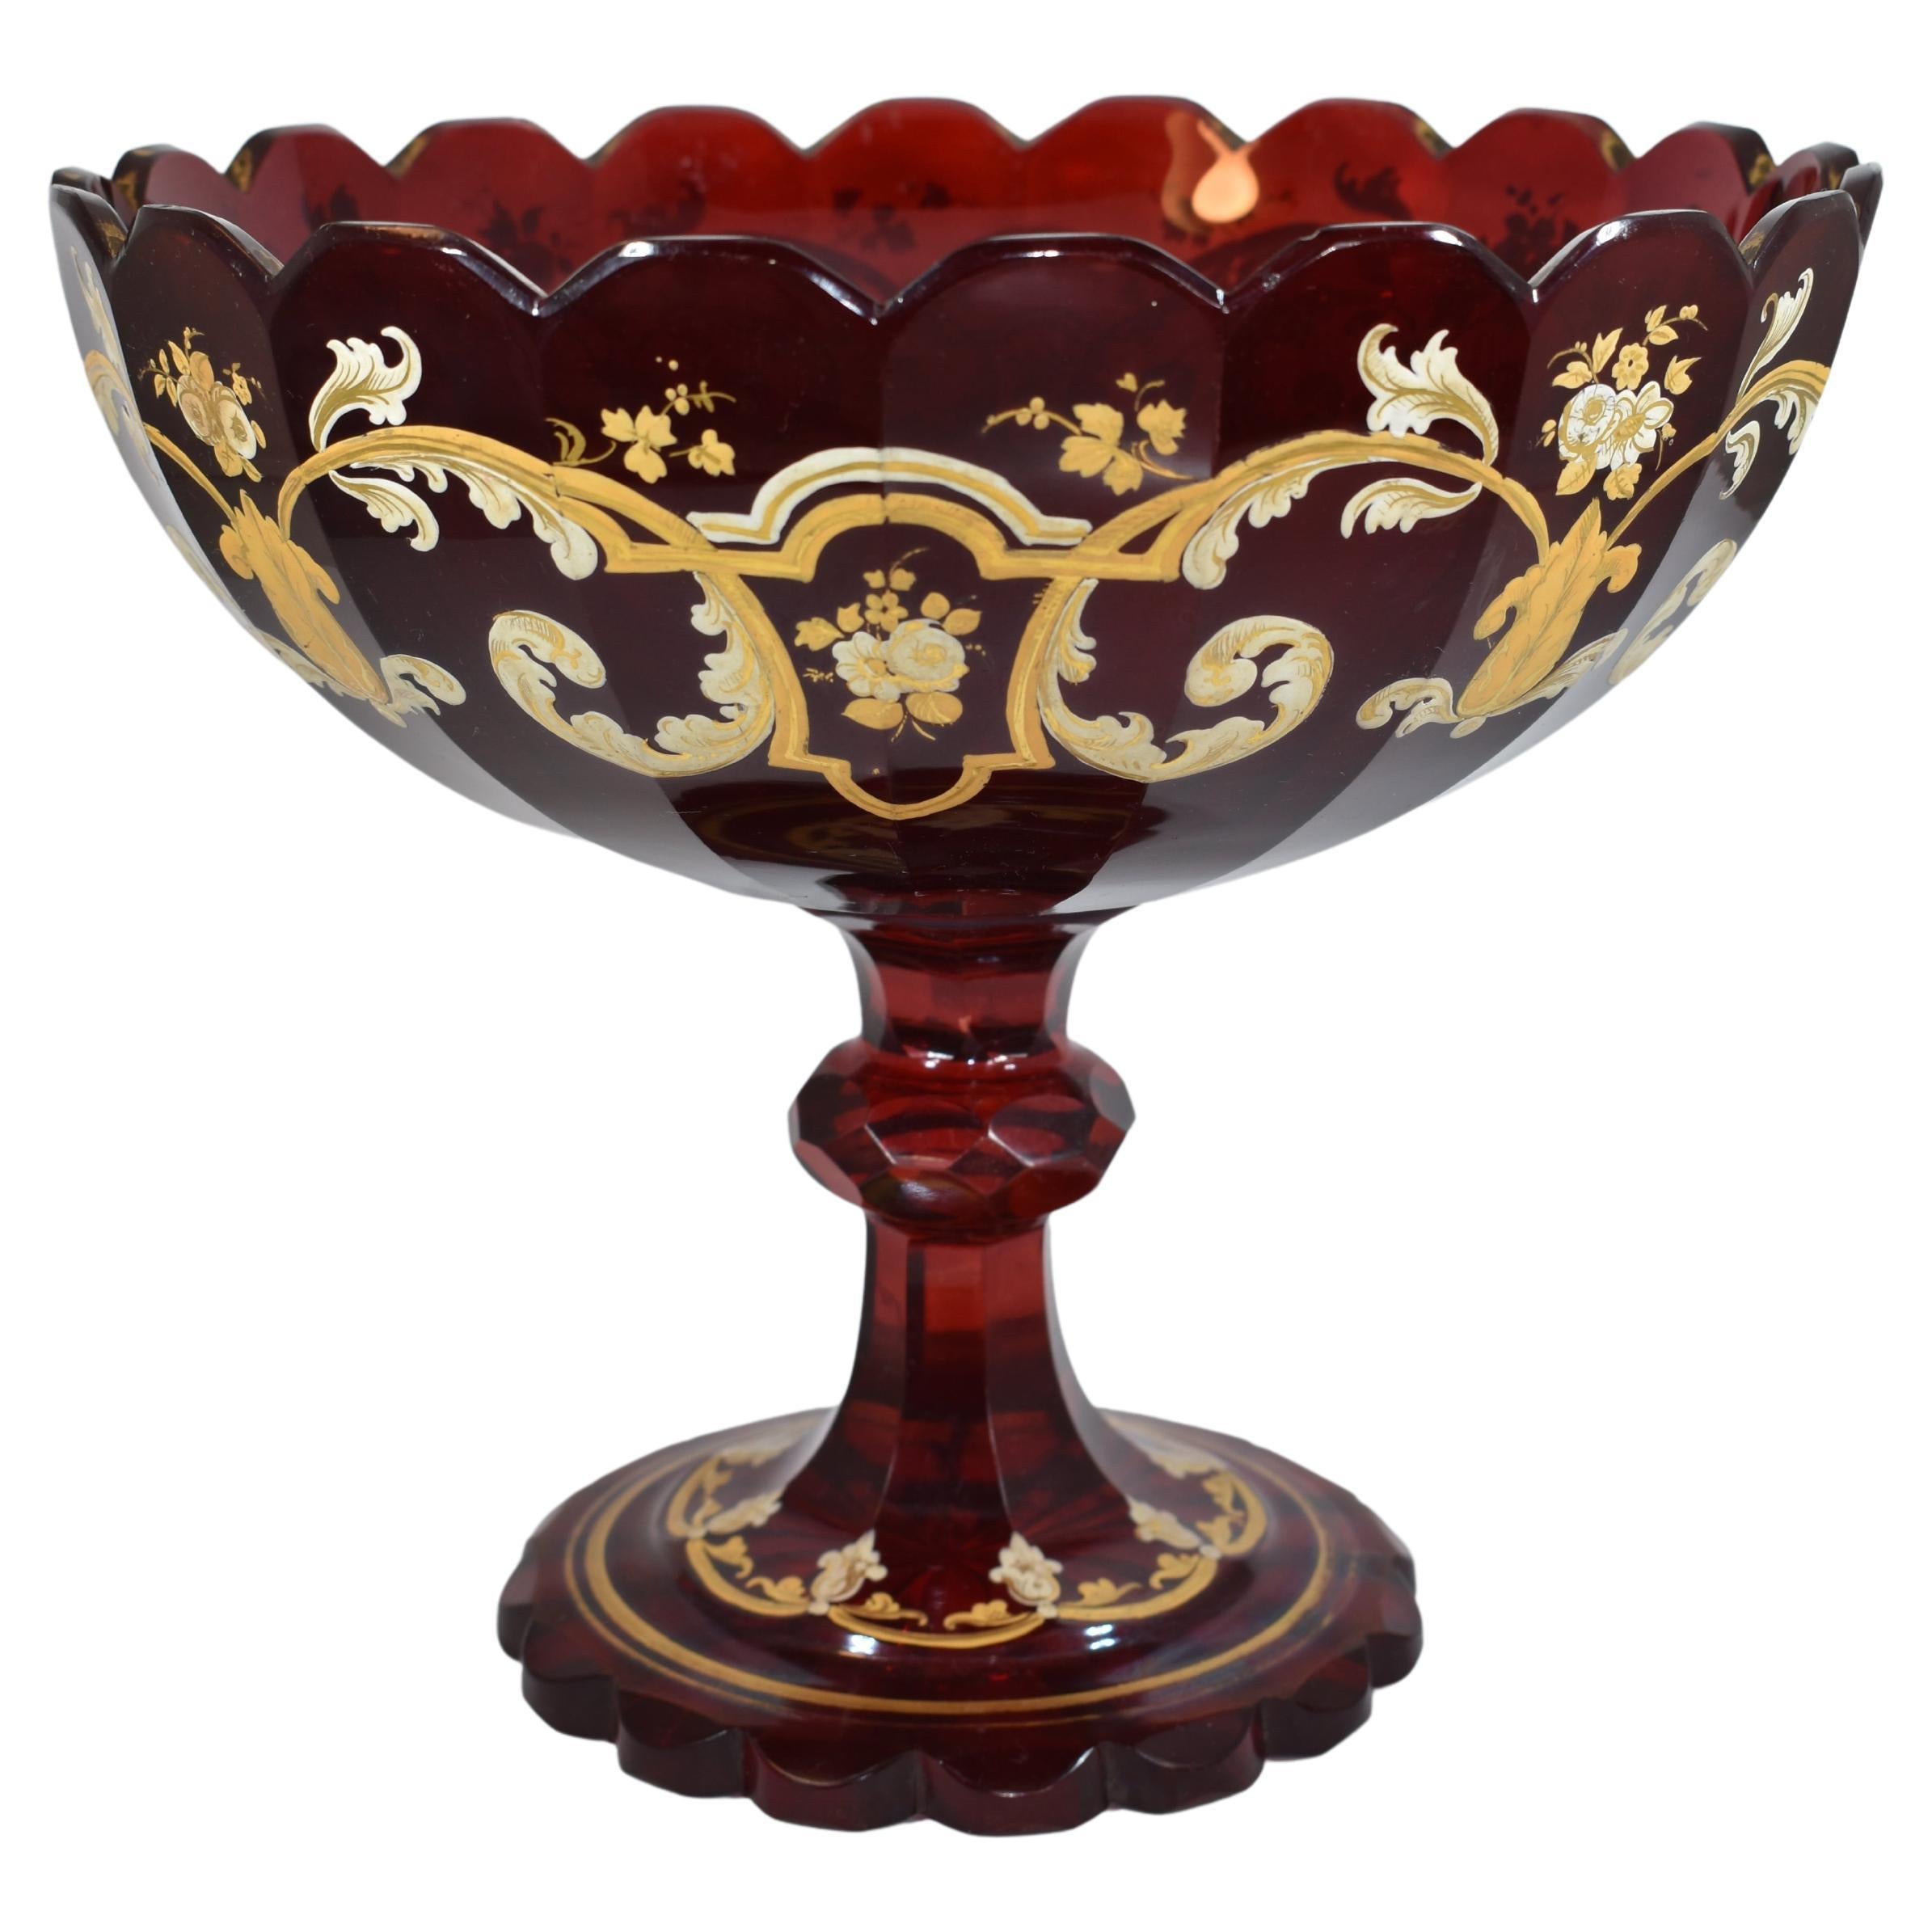 Stunning tazza bowl in deep transparent ruby red glass with scalloped rim

profusely decorated with 2-colored gilded enamel featuring scrollwork symmetric patterns, flowers and leaves

scalloped foot cut with a star pattern